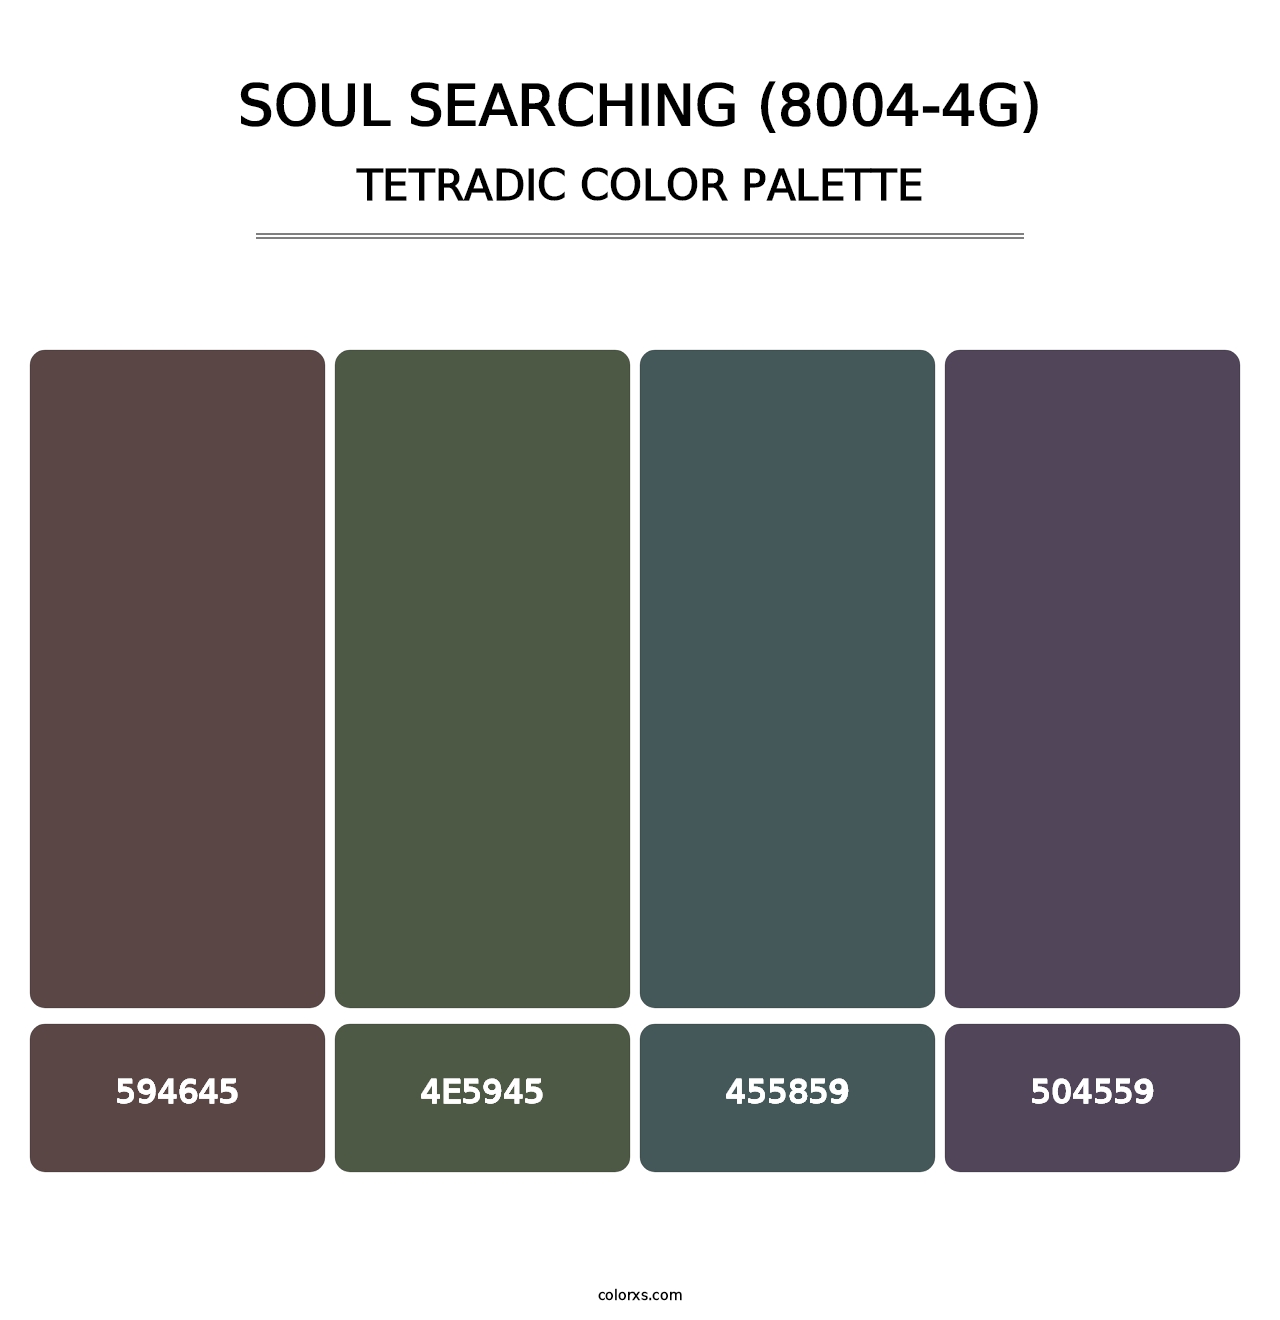 Soul Searching (8004-4G) - Tetradic Color Palette